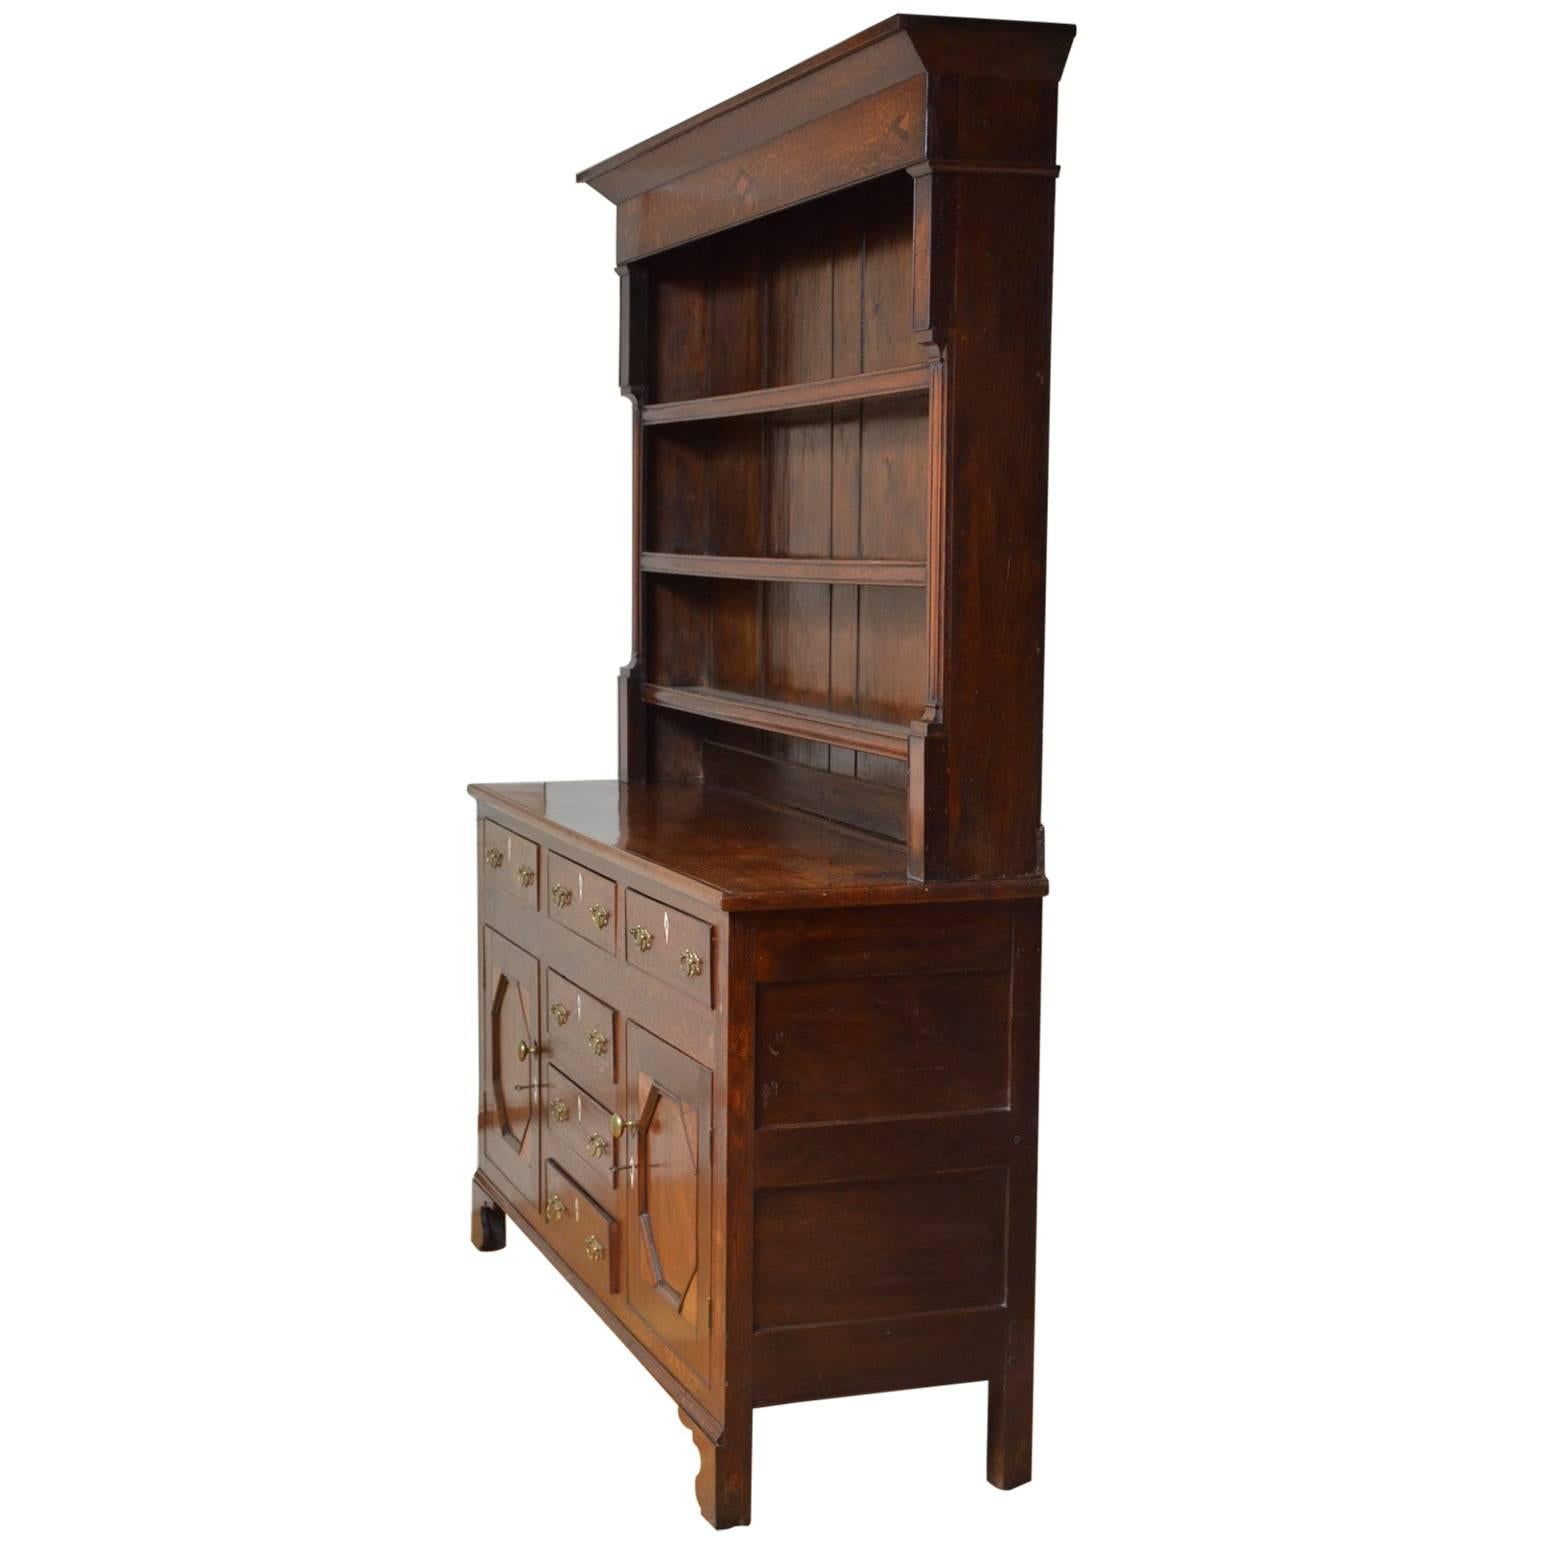 Sn4302 George III oak and mahogany Welsh dresser, having plate rack to back with outswpet cornice over inlaid frieze, three shelves with thumb moulded fronts, flanked by figured mahogany panels and shaped pilasters. The base having three inlaid and